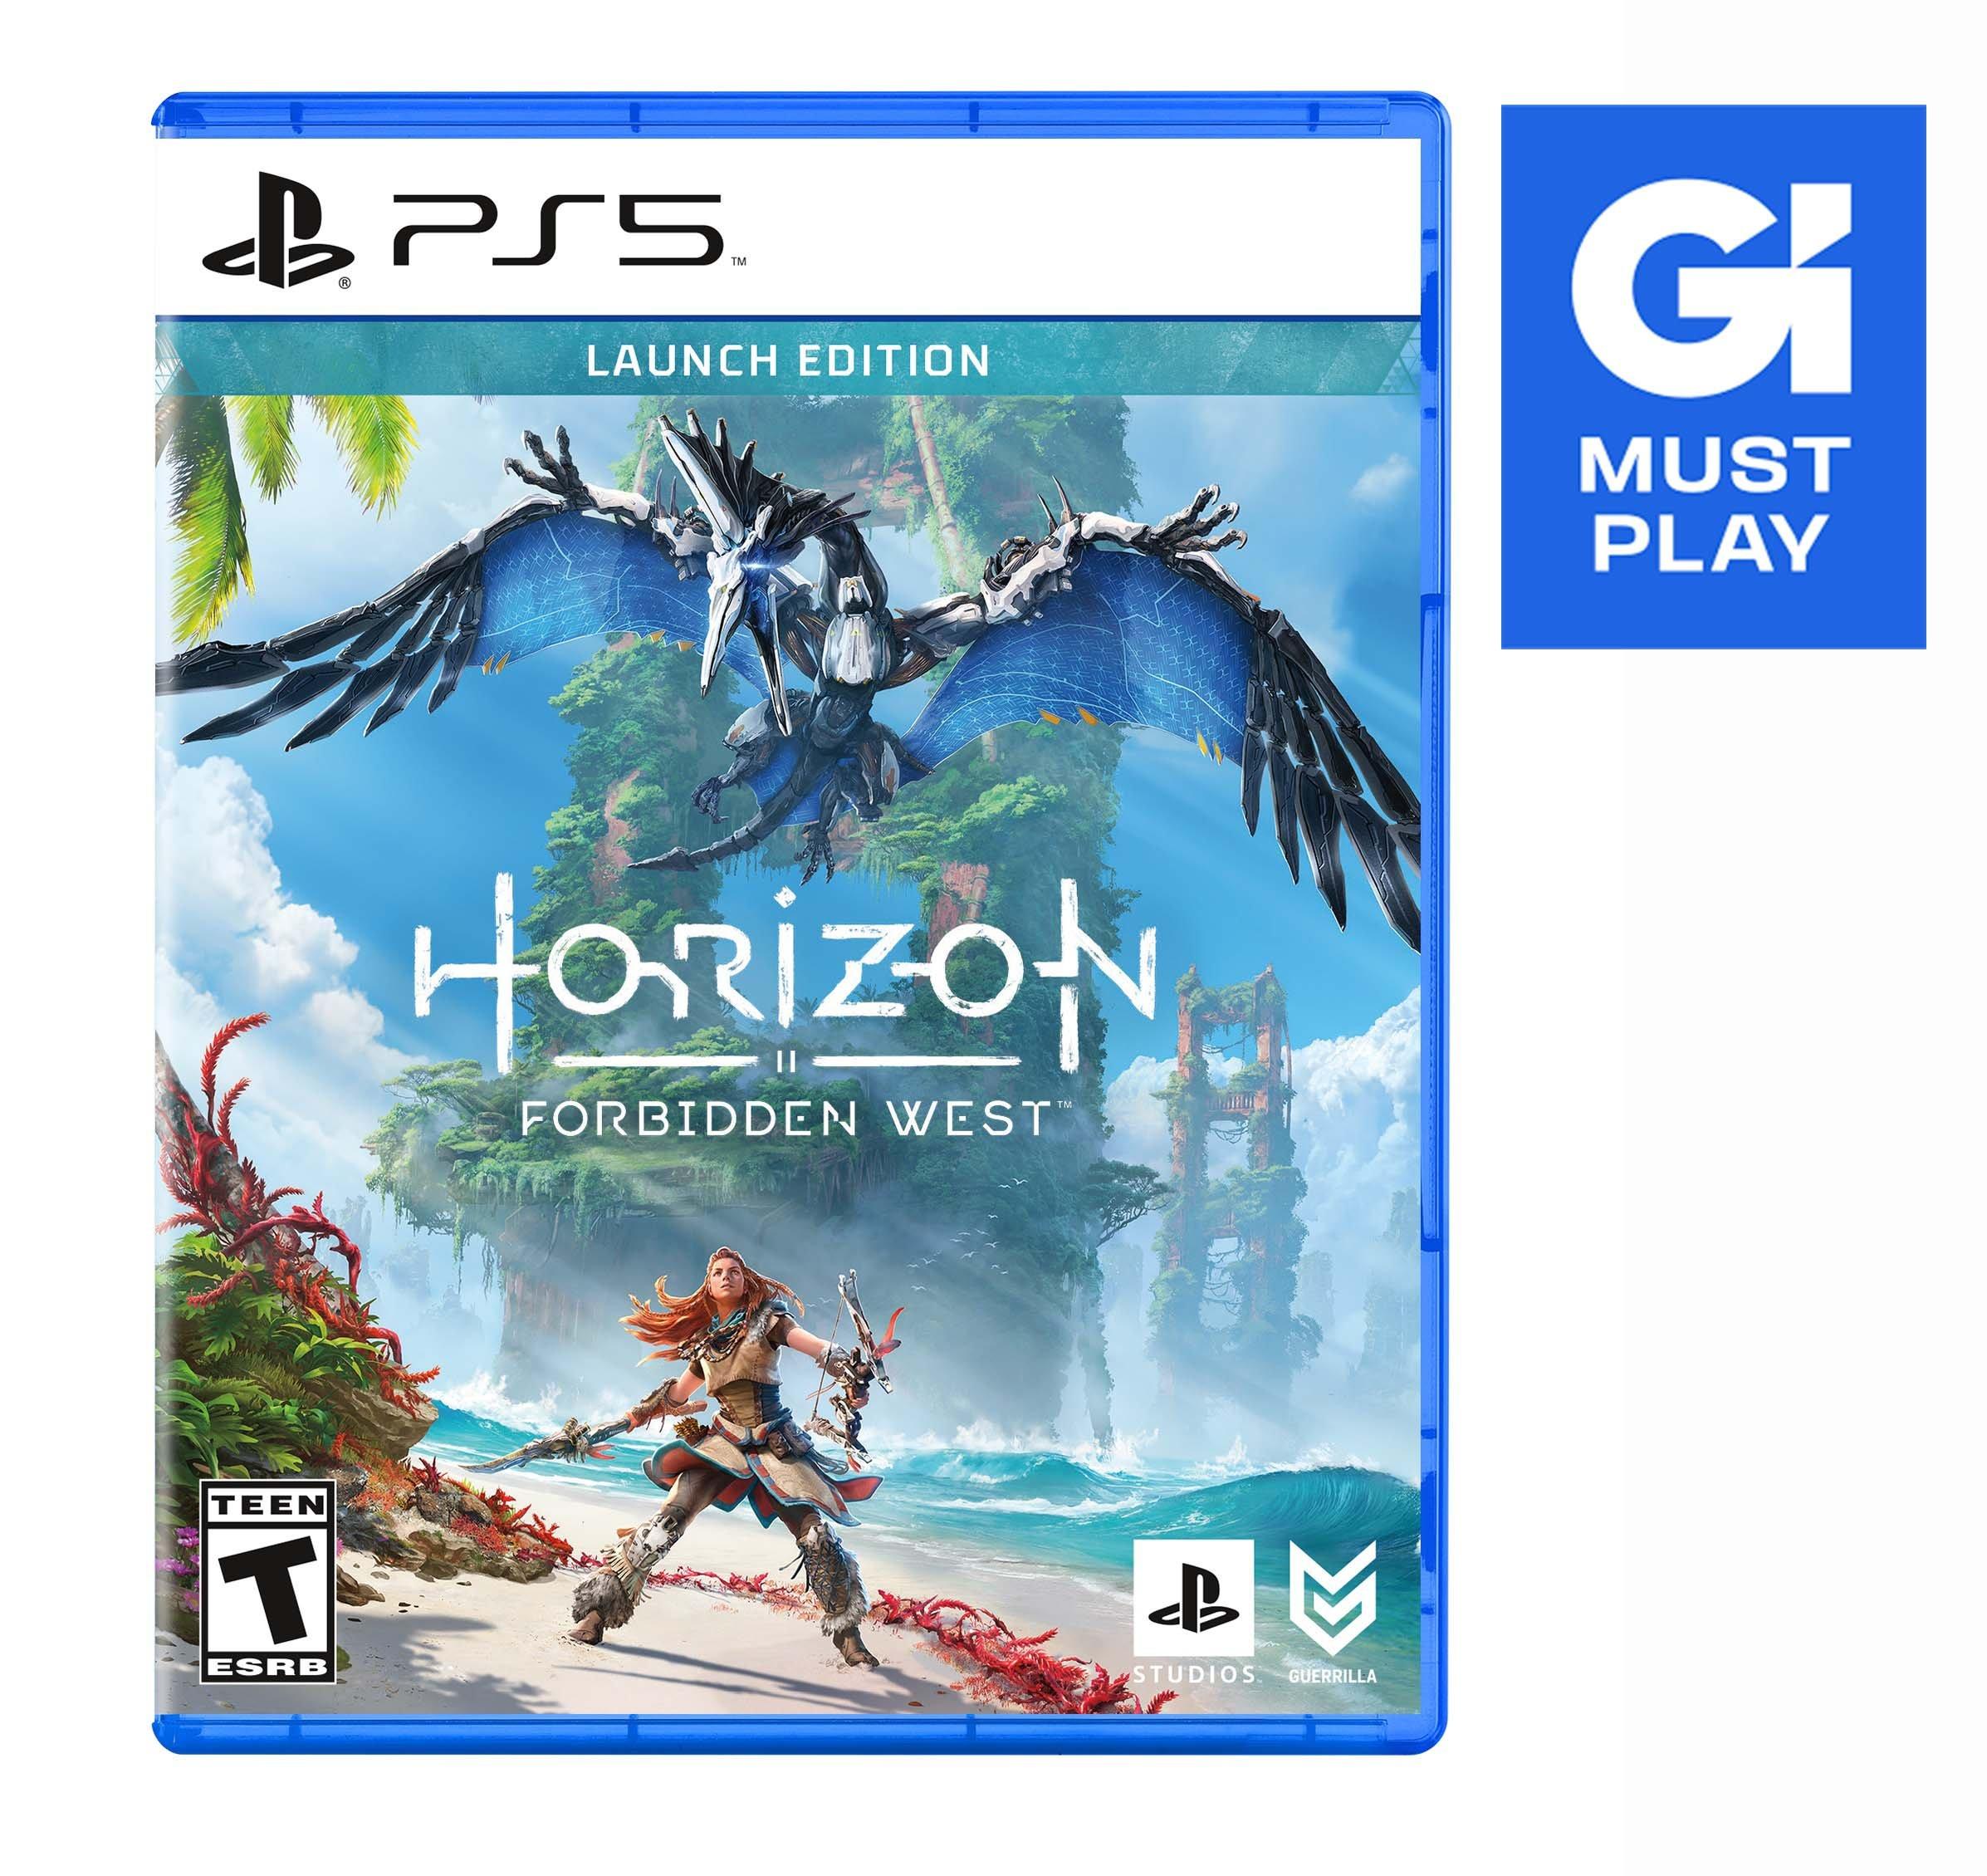 Horizon Forbidden West Lego is launching in May